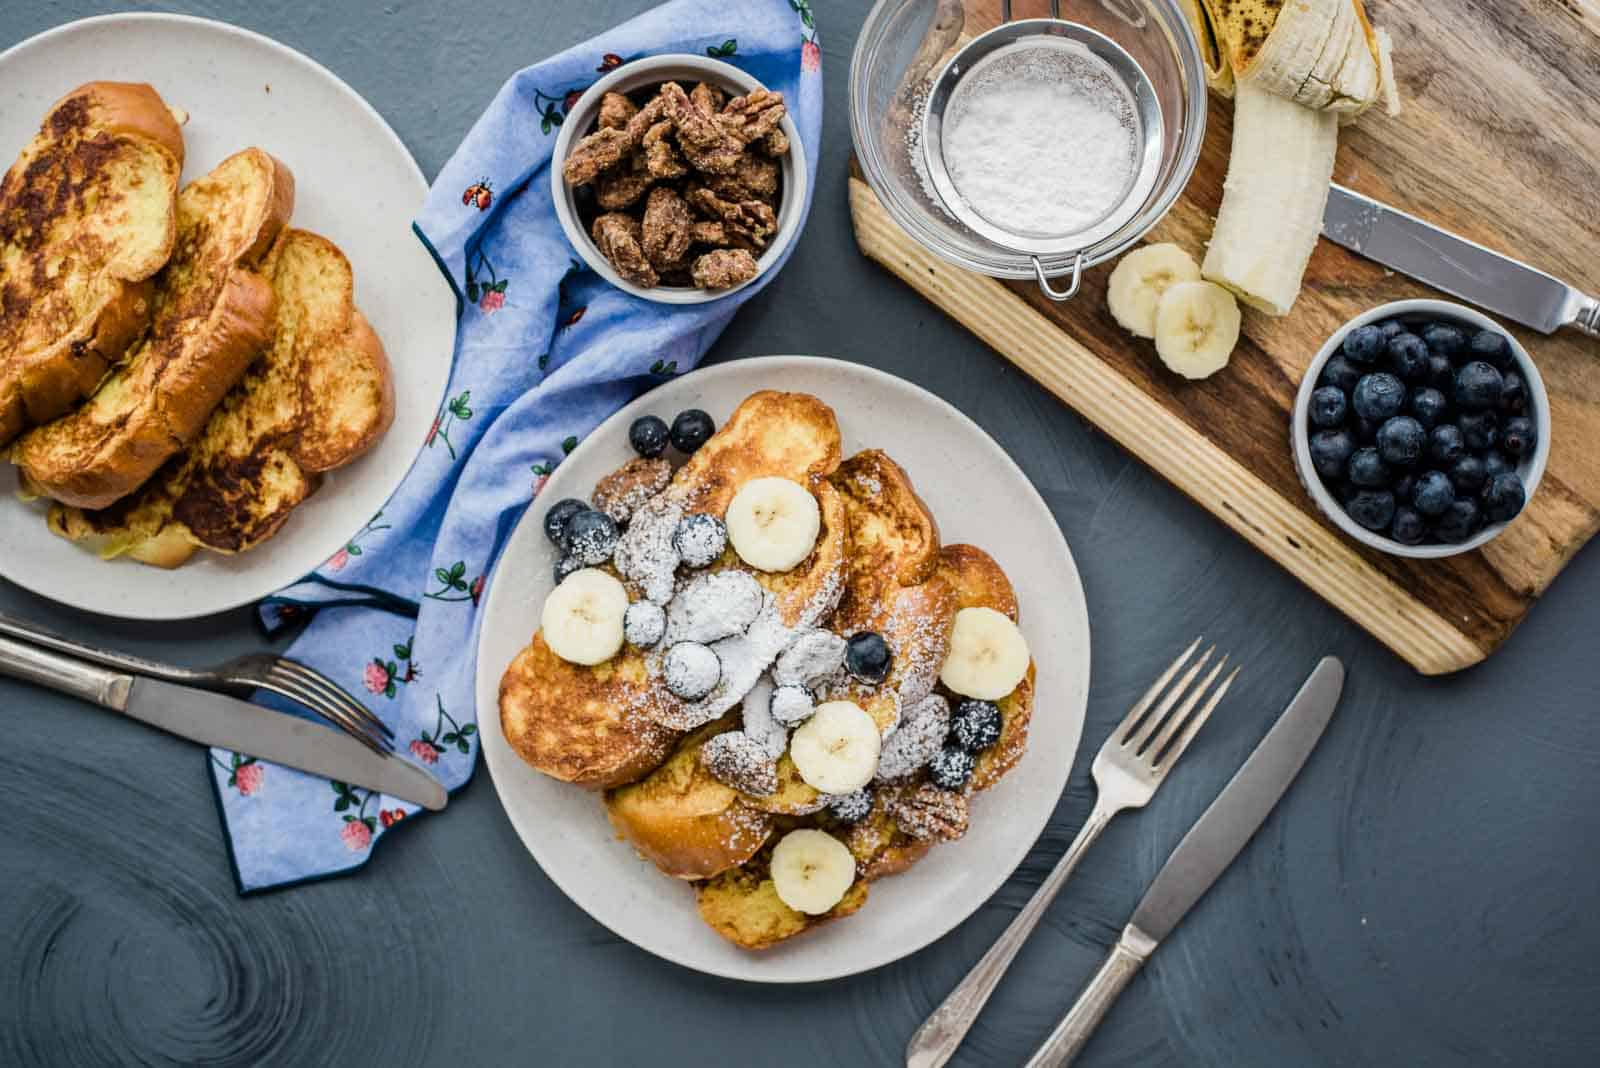 A serving of vanilla french toast next to a serving plate and bowls of candied pecans, blueberries, powdered sugar, and a banana.